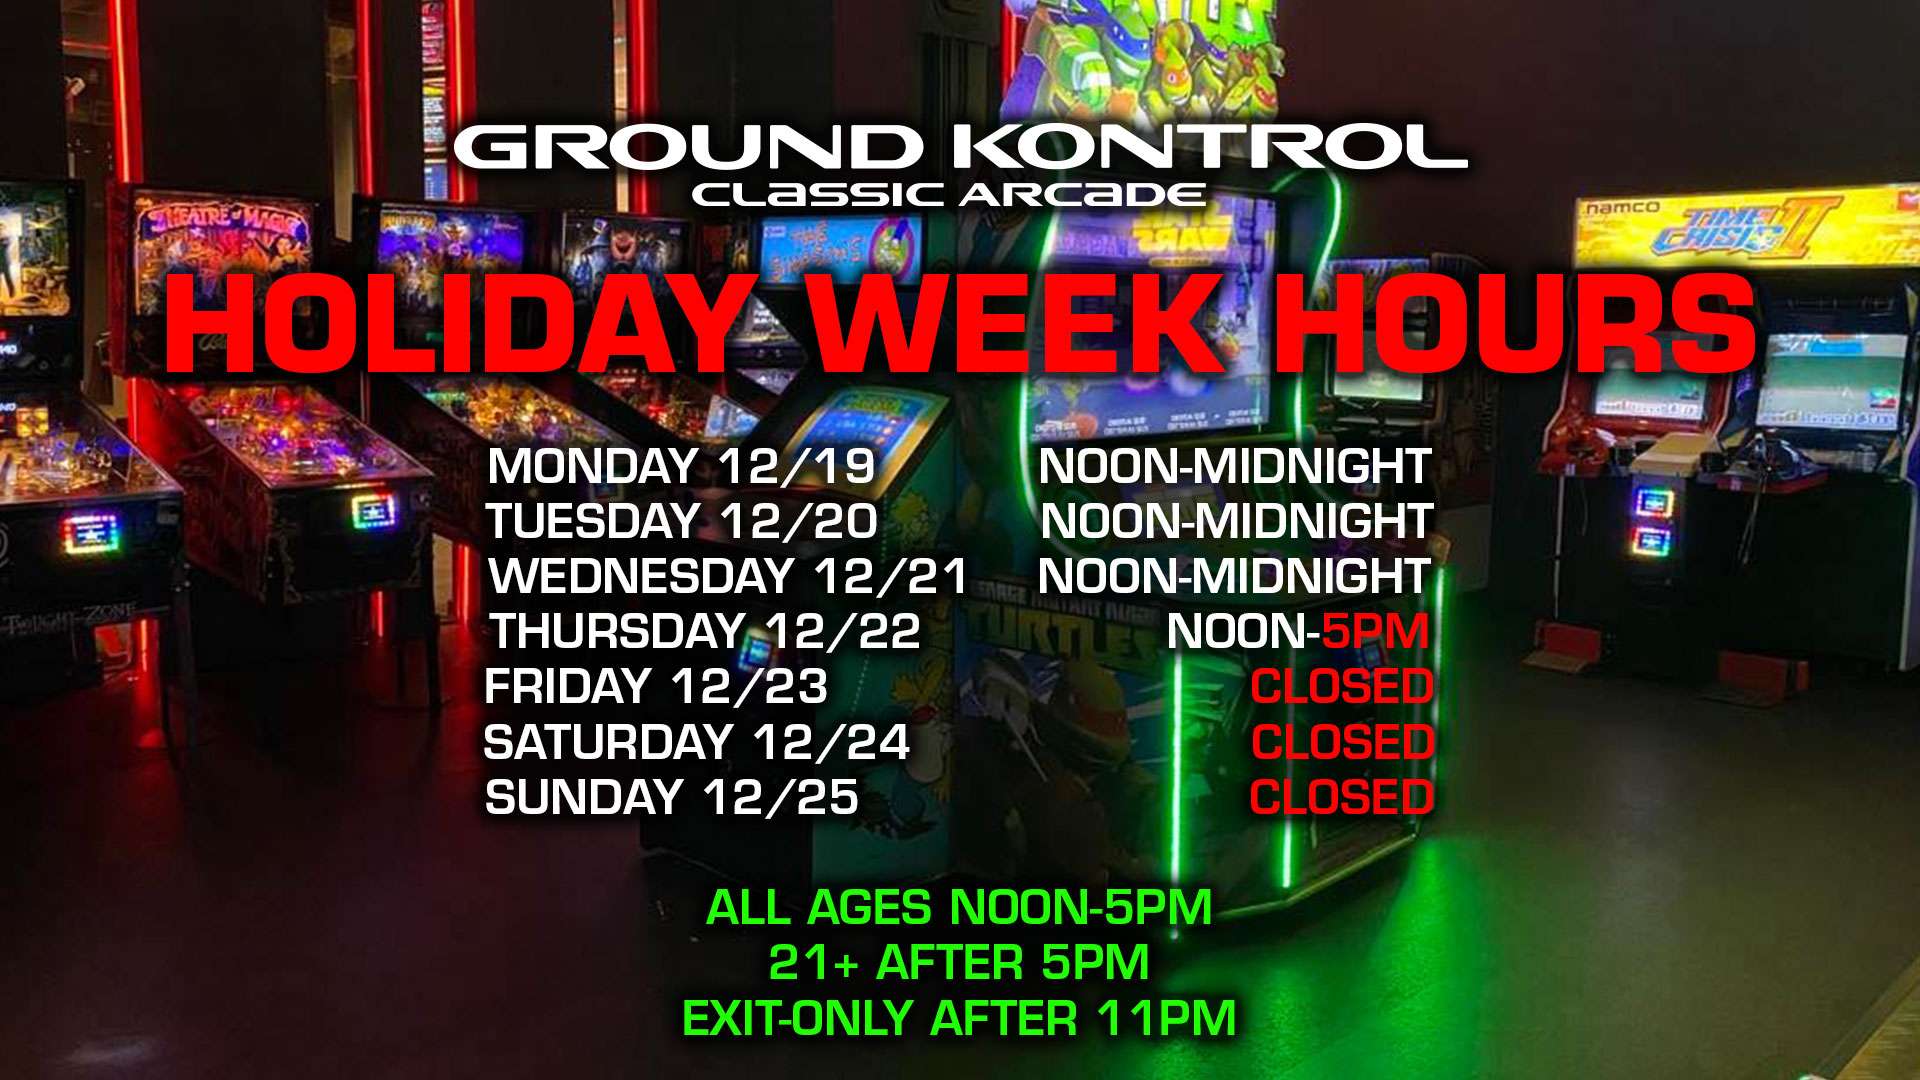 Winter Holiday Week Hours